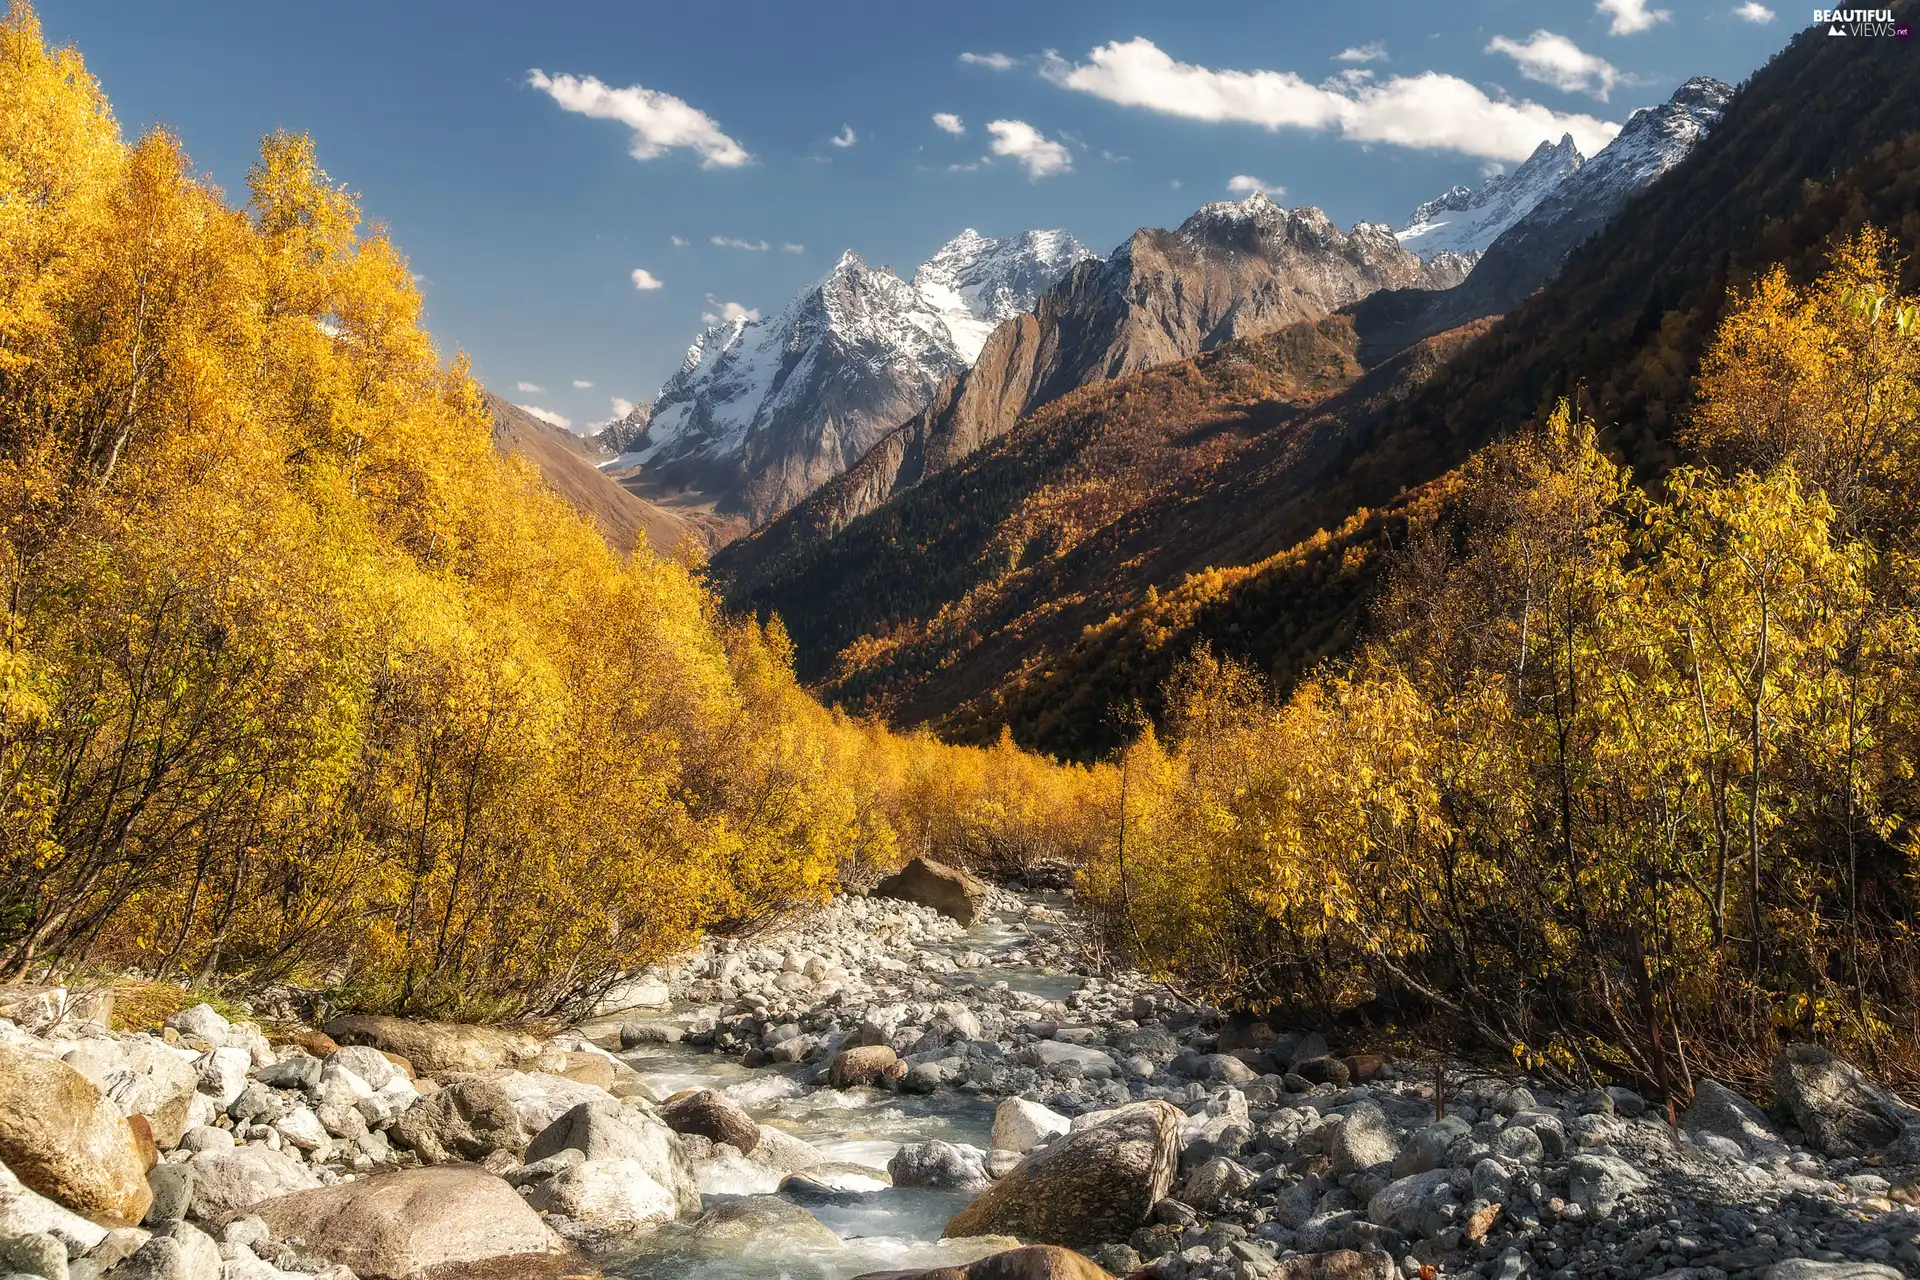 trees, Mountains, River, Yellowed, autumn, viewes, Stones